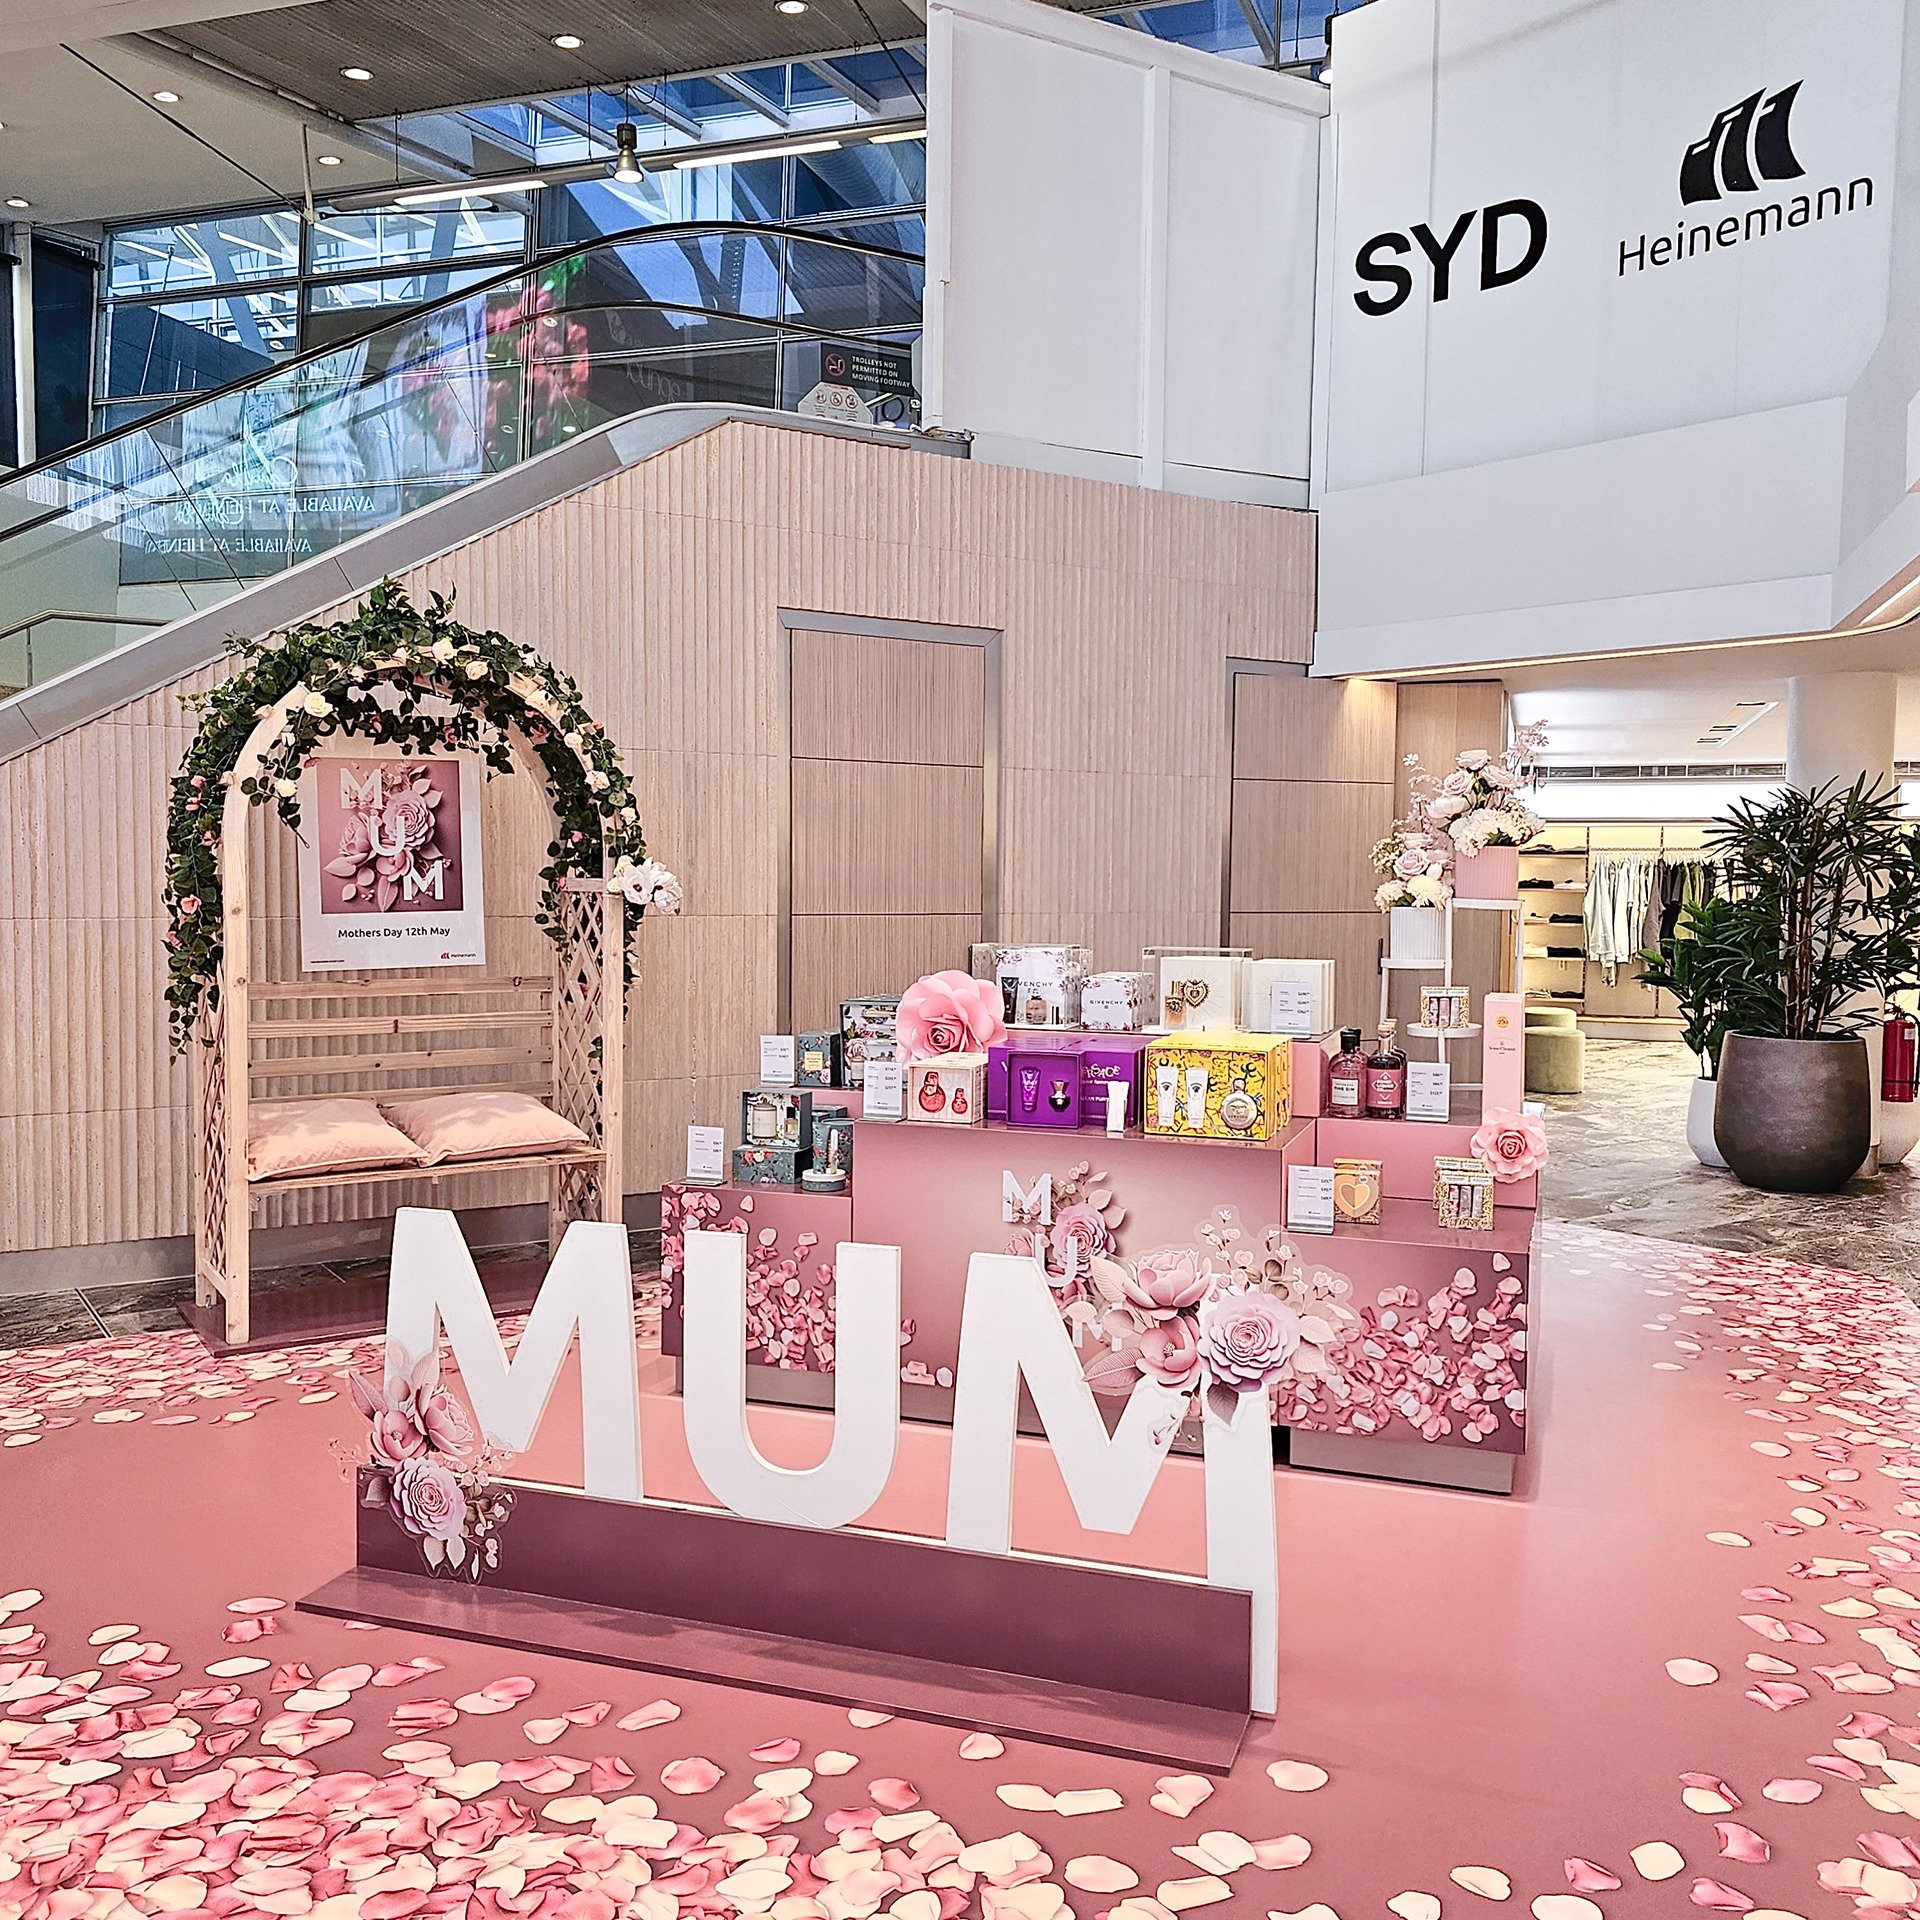 🌷Hope everyone had an amazing time with their #mum celebrating #MothersDay ✨ as we built this #popupstore for @heinemann_anz at #SydneyDomesticAirport T2.🌼

Installation: @artandsoul.com.au
Spatial design &amp; Fabrication: @artandsoul.com.au
Paper